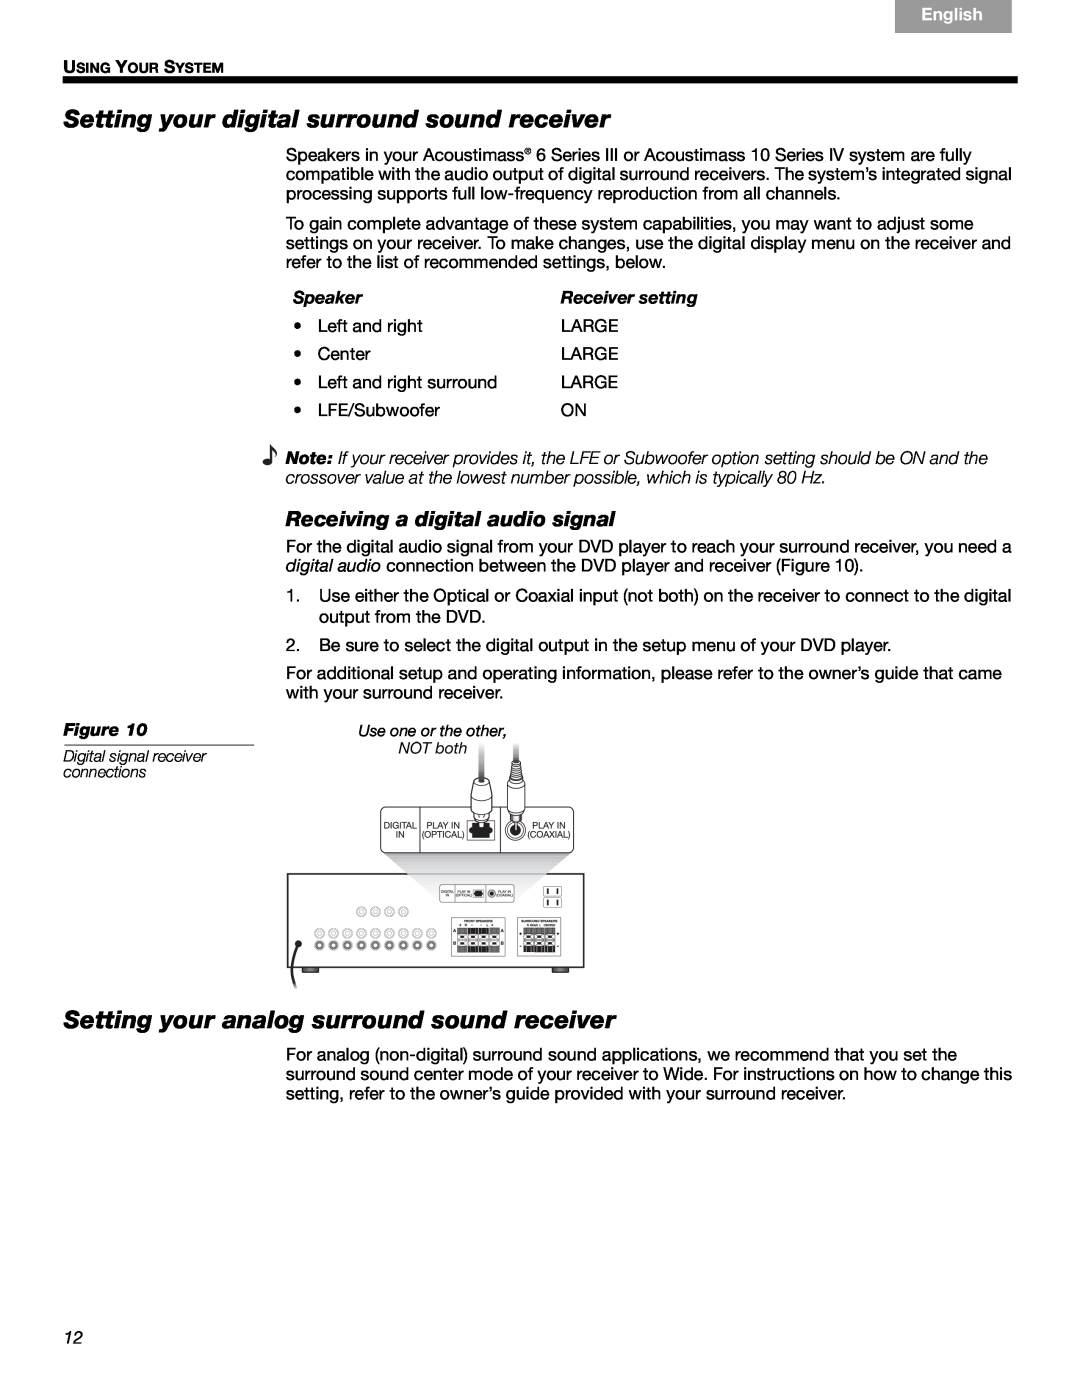 Bose 6 SERIES III manual Setting your digital surround sound receiver, Setting your analog surround sound receiver, Speaker 